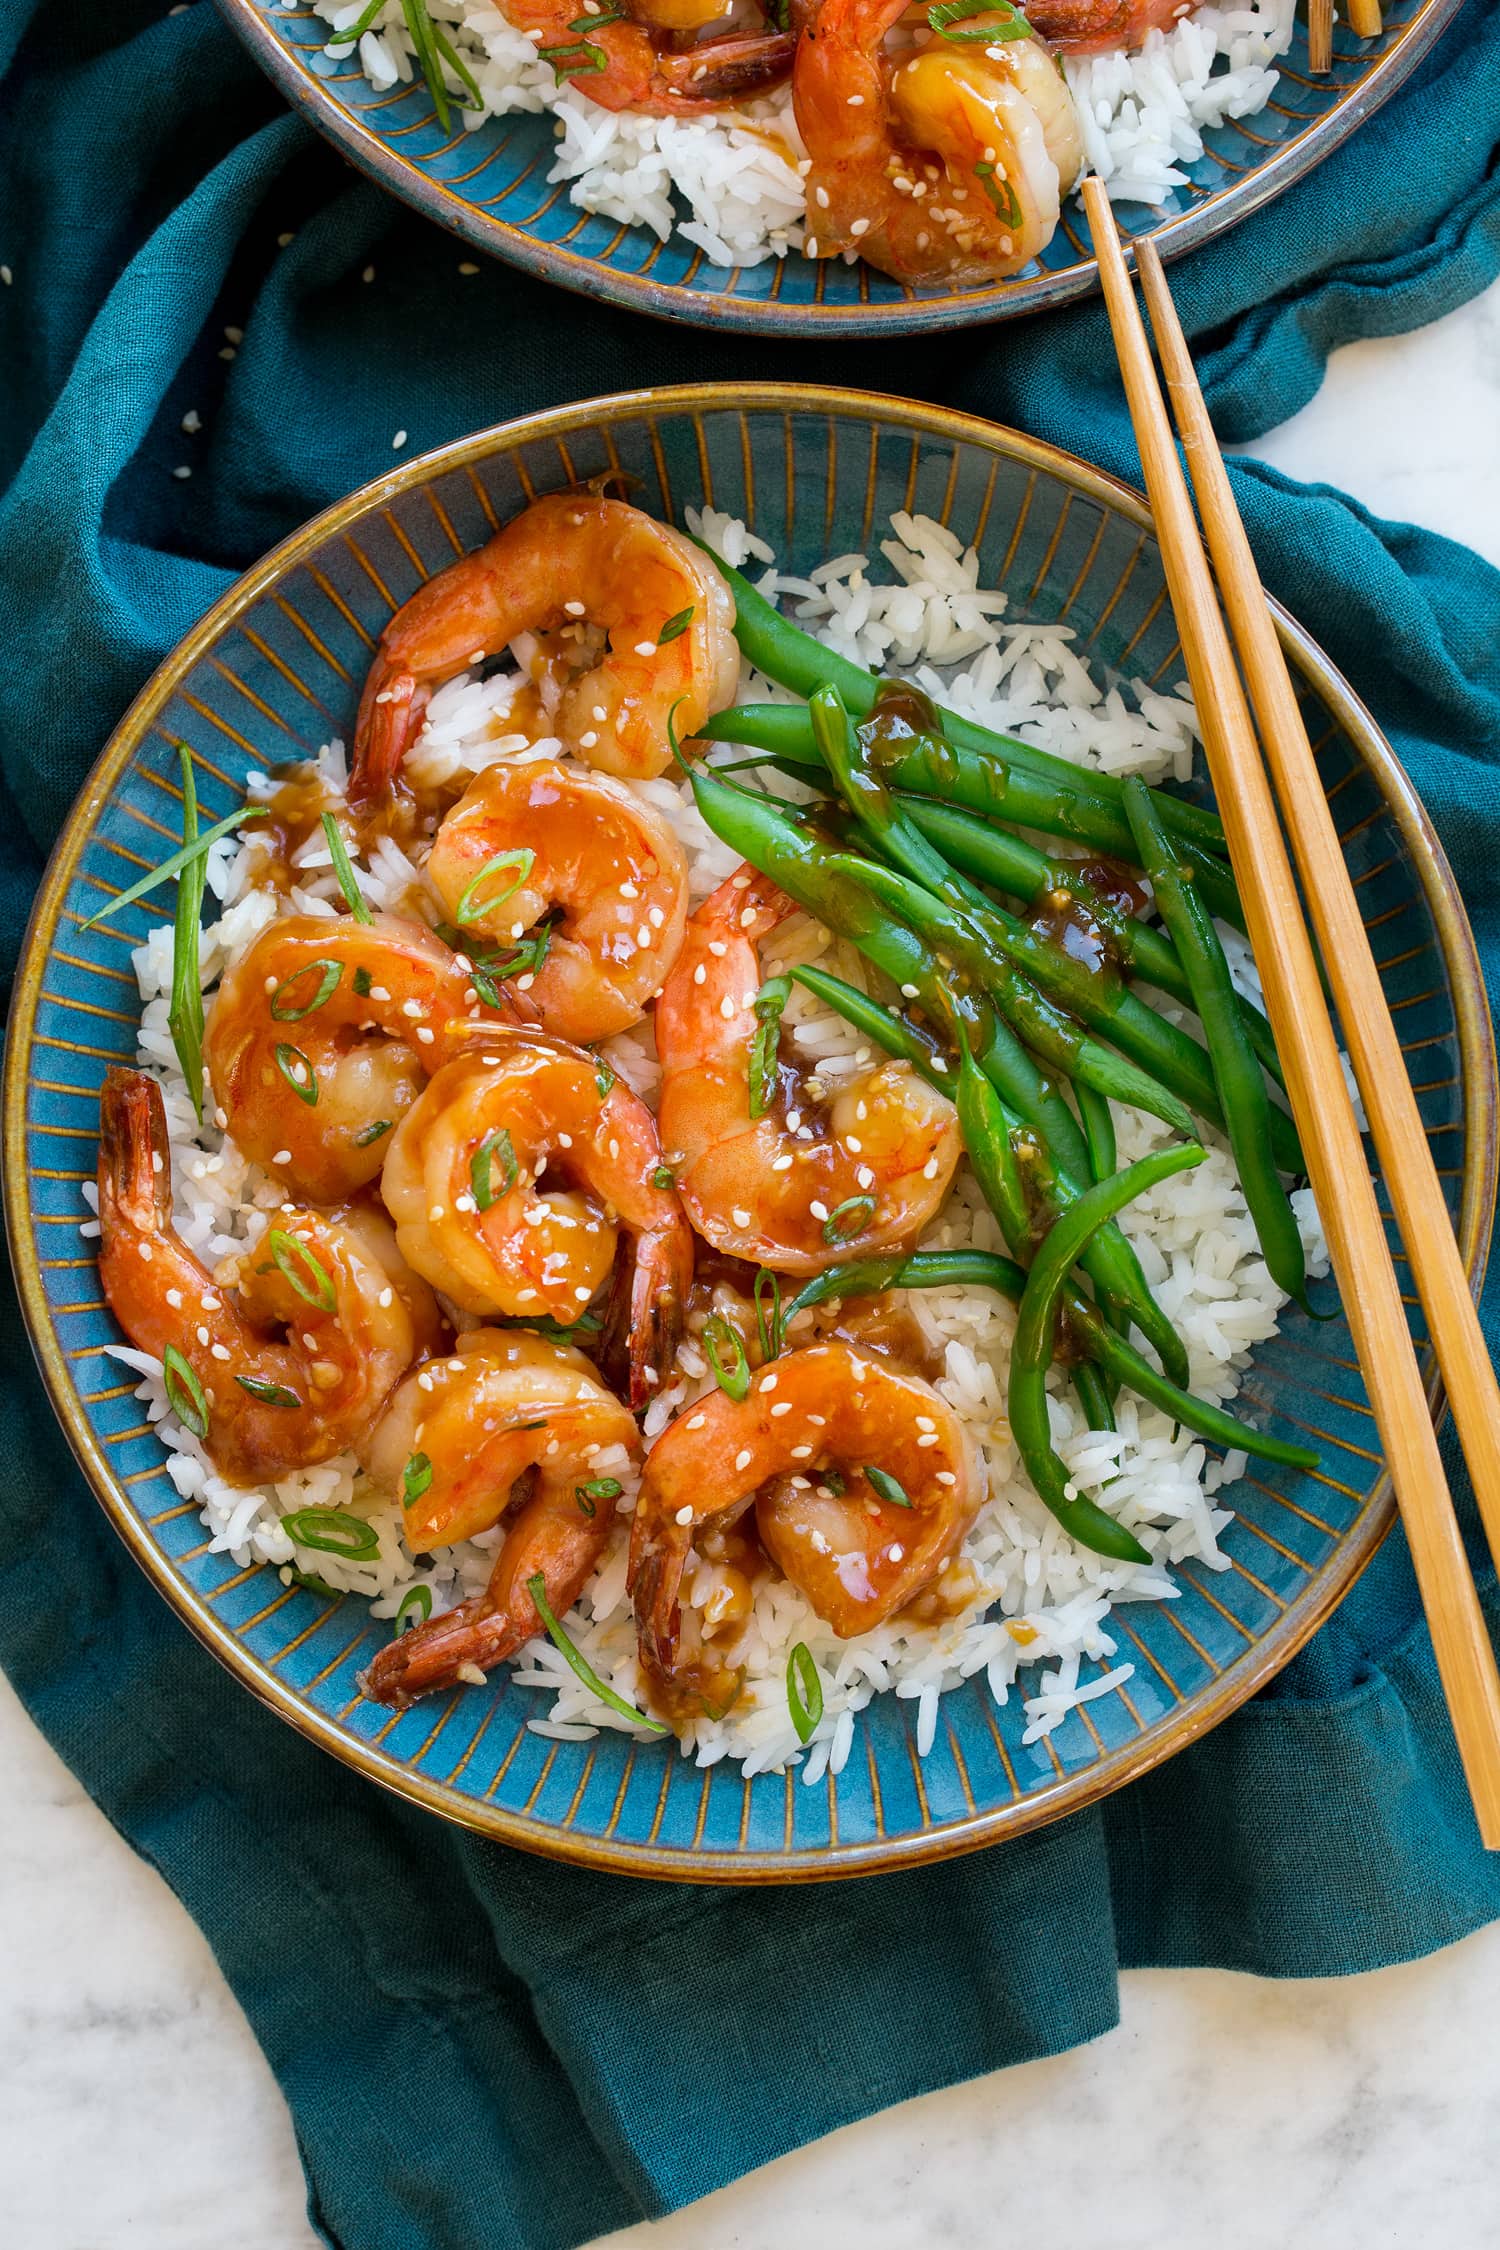 Teriyaki shrimp in a blue bowl with rice, green beens and green onions. Shown with a blue cloth and chopsticks.